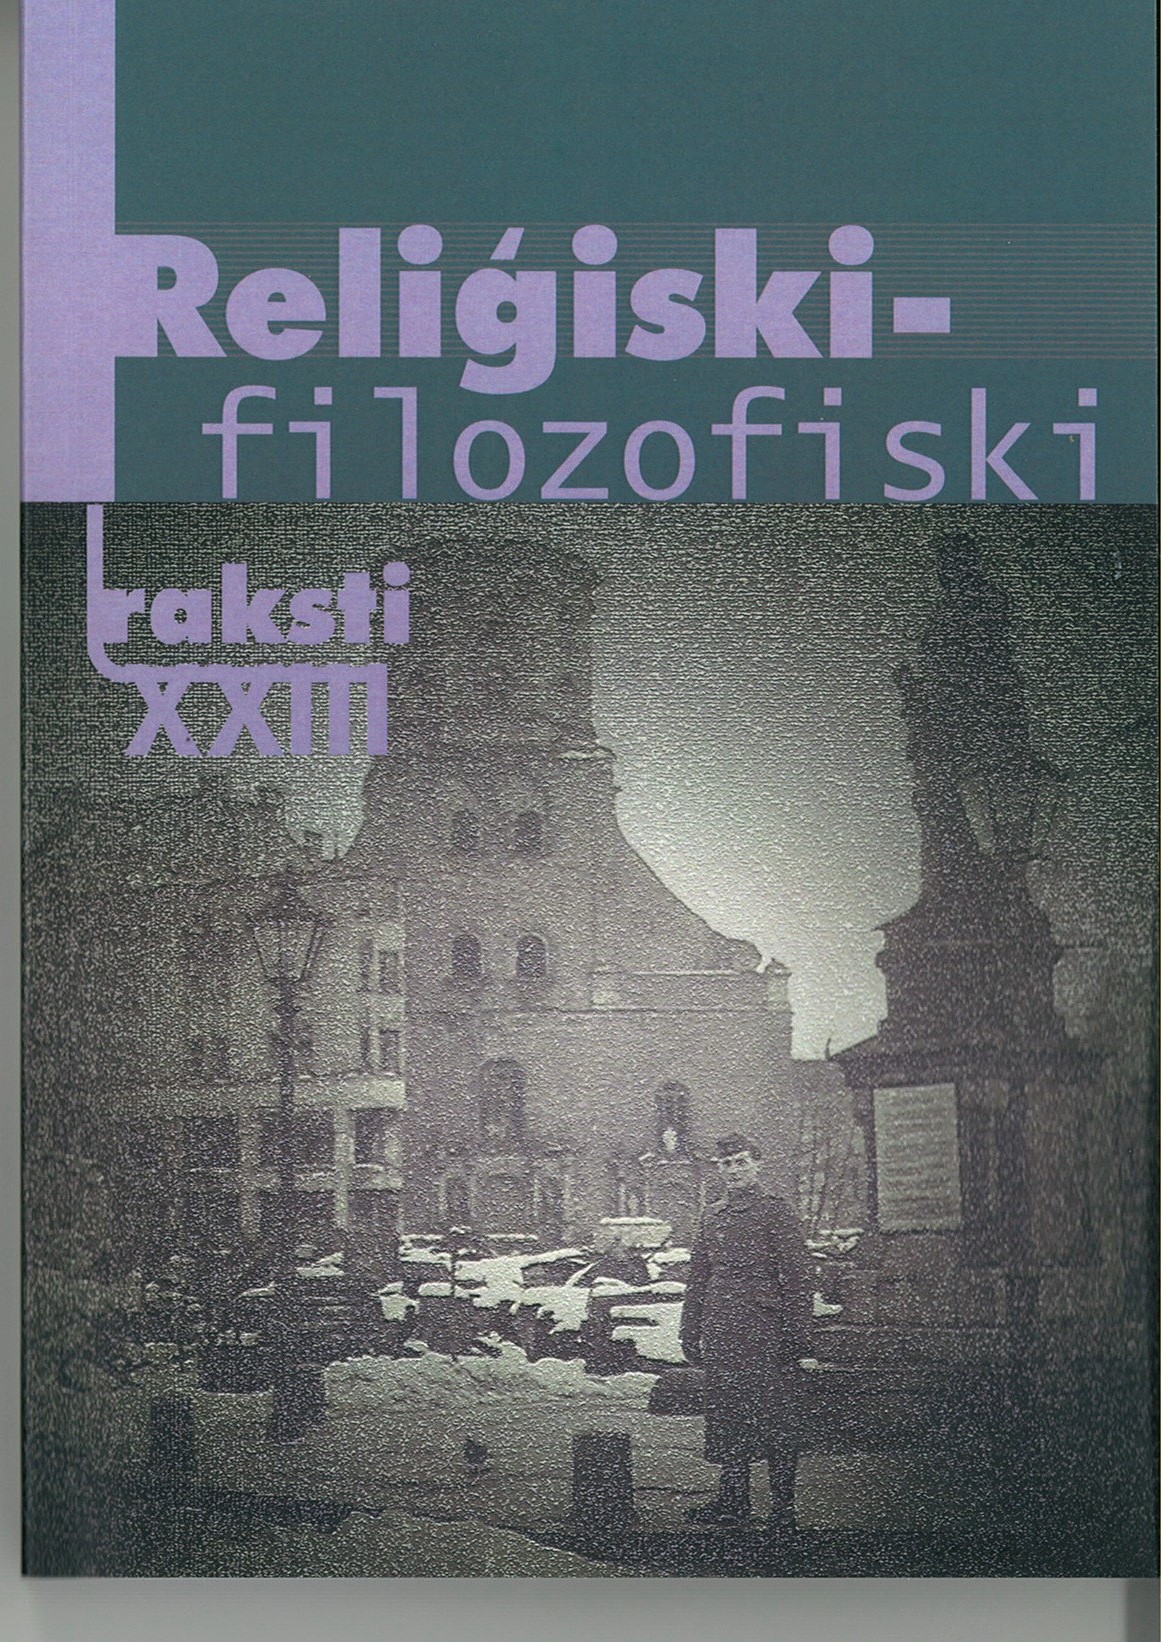 Political Propaganda and Scholarly Research in Periodicals
of the League of Militant Atheists (1925–1935) Cover Image